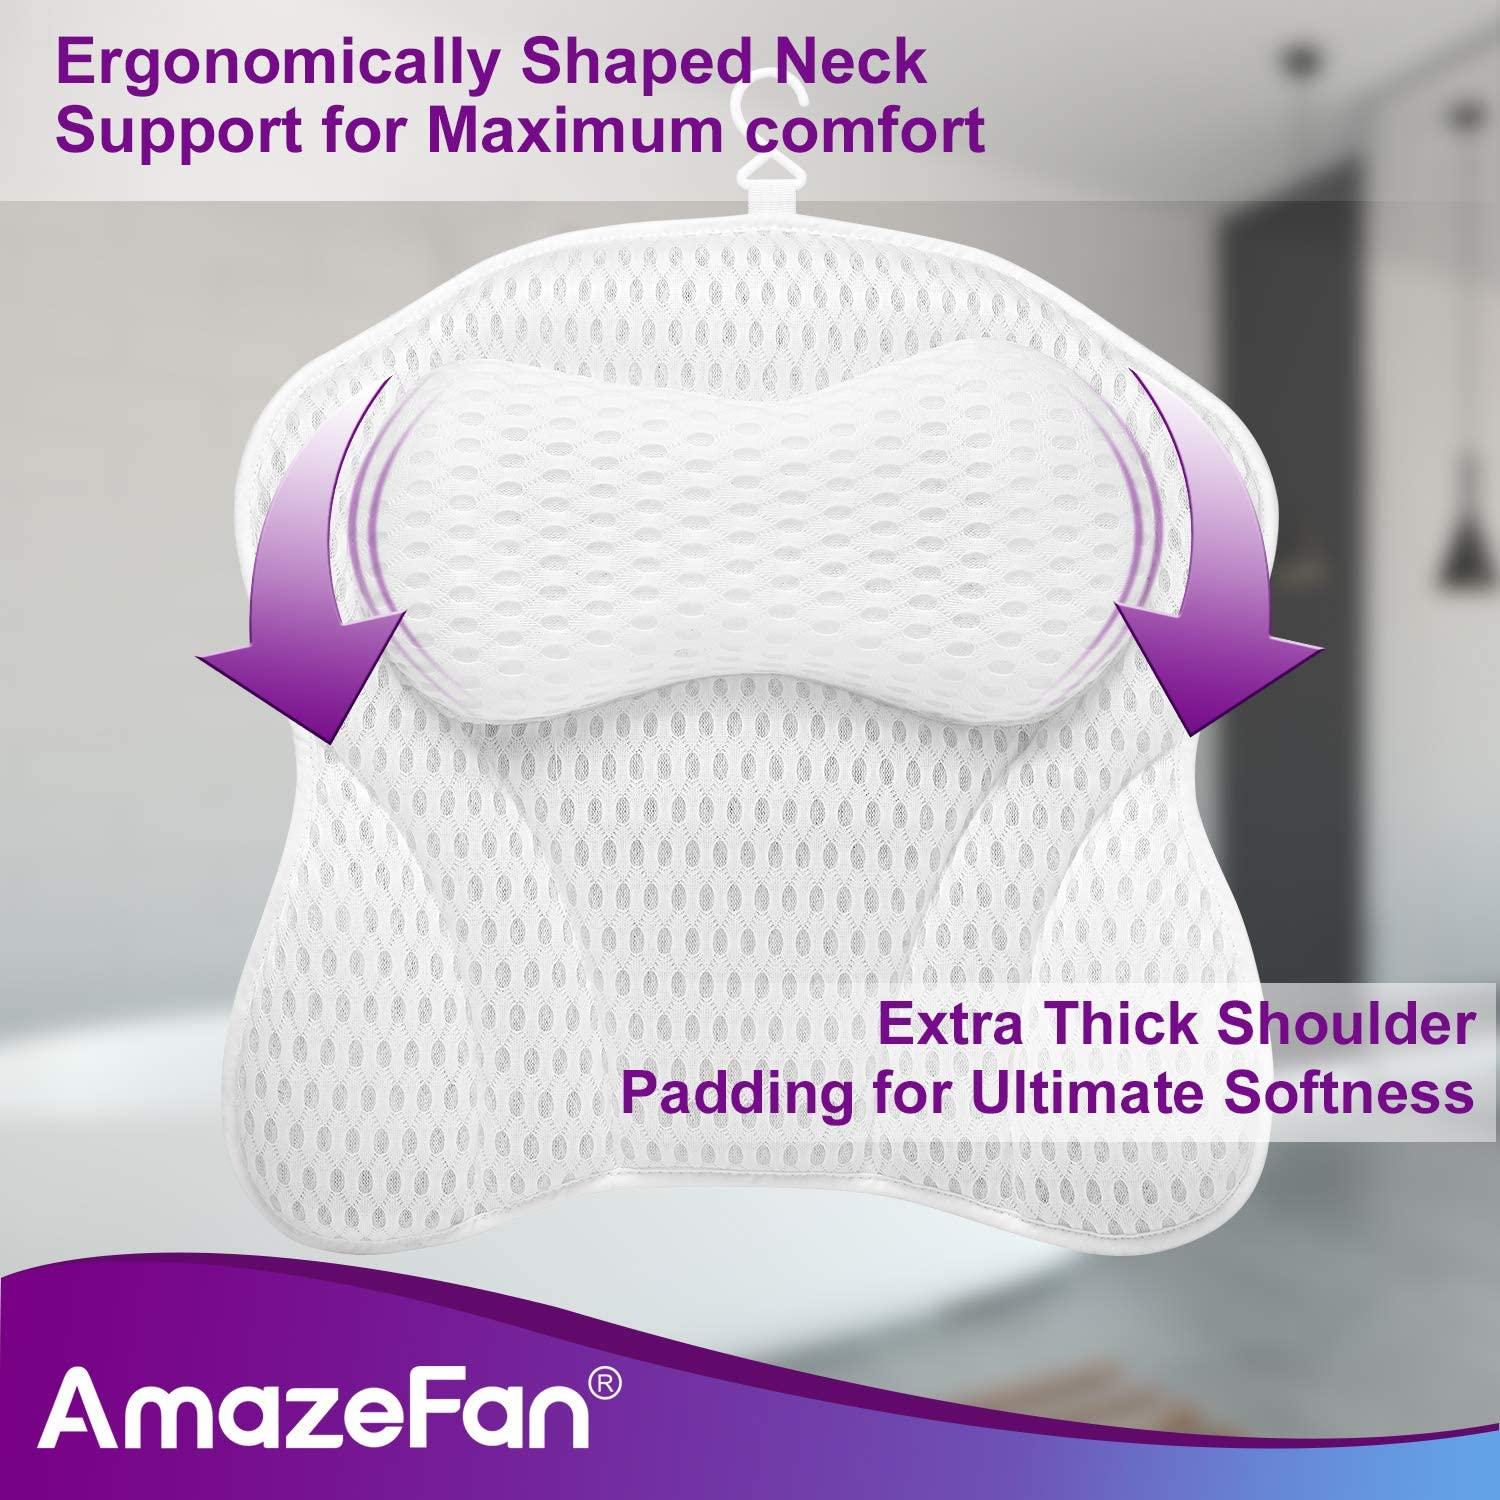 US. Patent Design]AmazeFan Bath Pillow, Bathtub Spa Pillow with 4D Air Mesh  Technology and 7 Suction Cups, Helps Support Head, Back, Shoulder and Neck,  Fits All Bathtub, Hot Tub and Home Spa